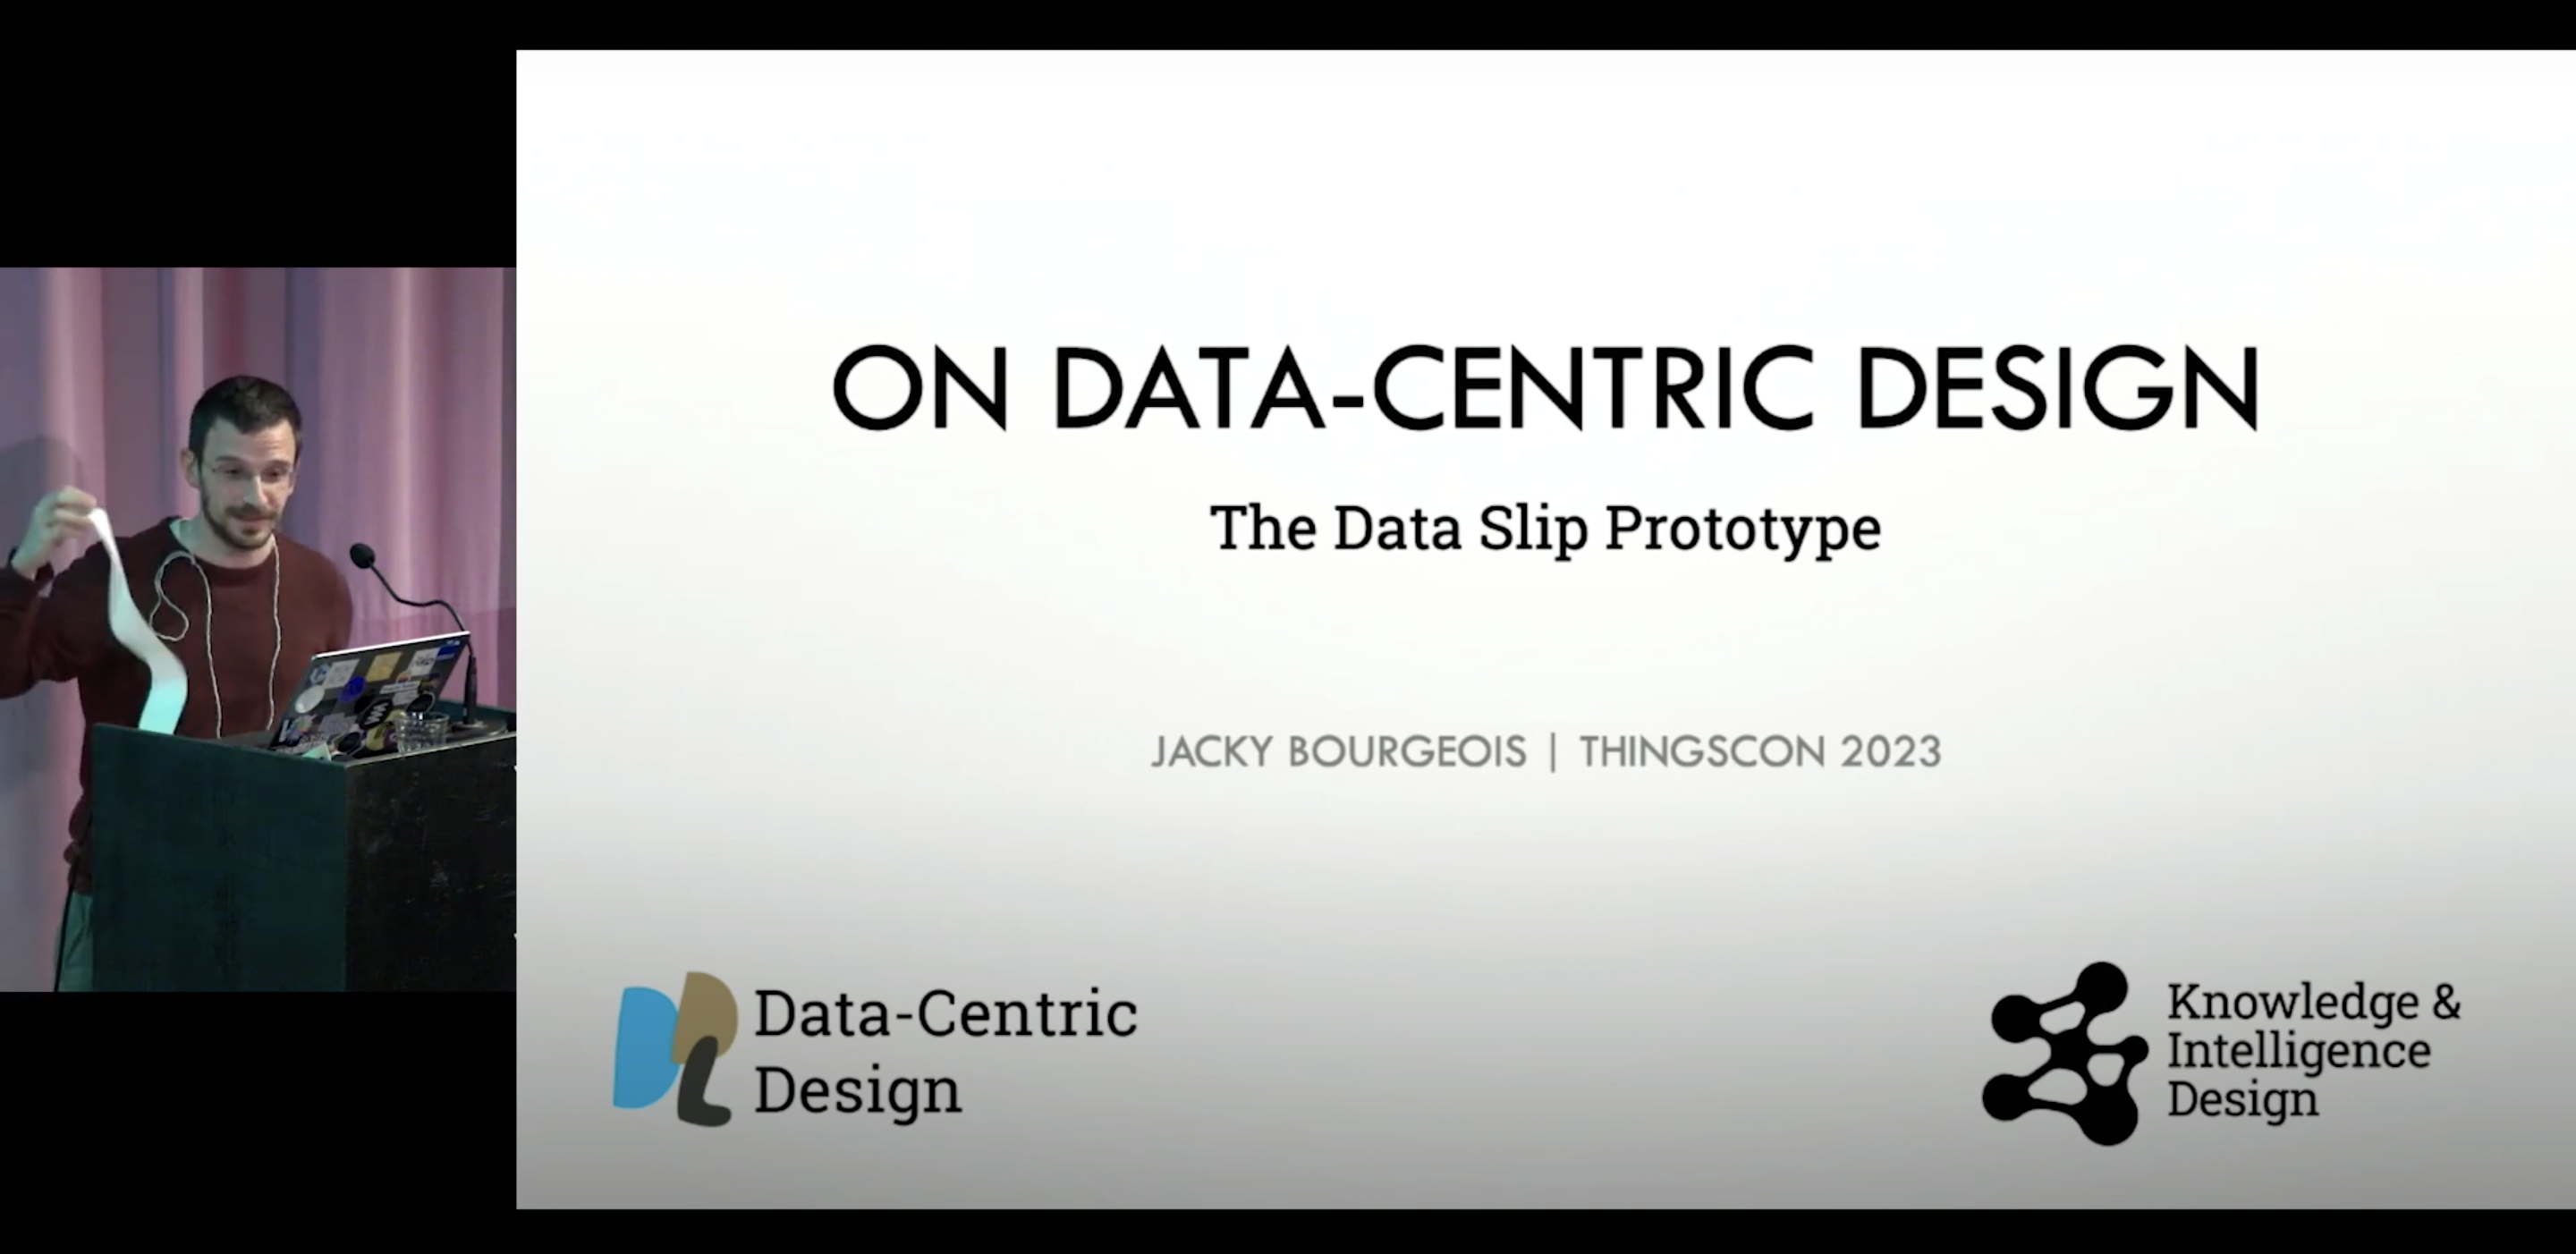 Jacky Bourgeois presenting the dataslip at ThingsCon '23